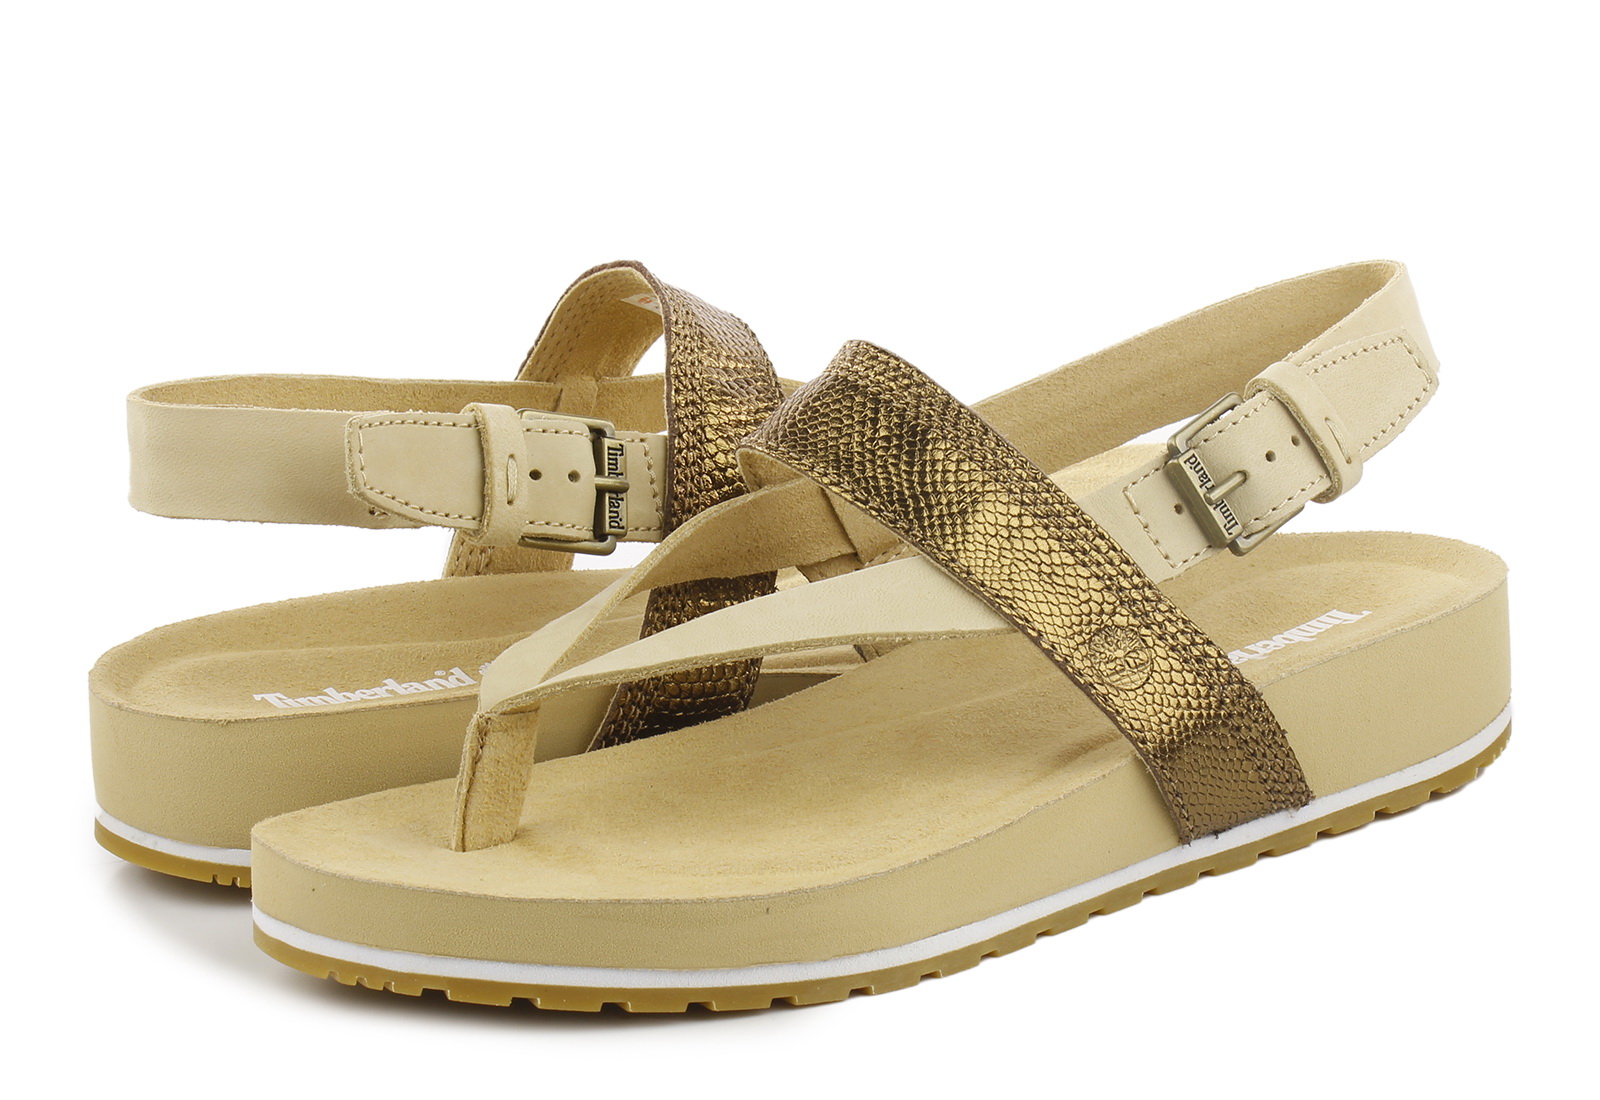 Munching Circus Punt Timberland Sandals - Malibu Waves Thong - A2PZT-BEI - Online shop for  sneakers, shoes and boots